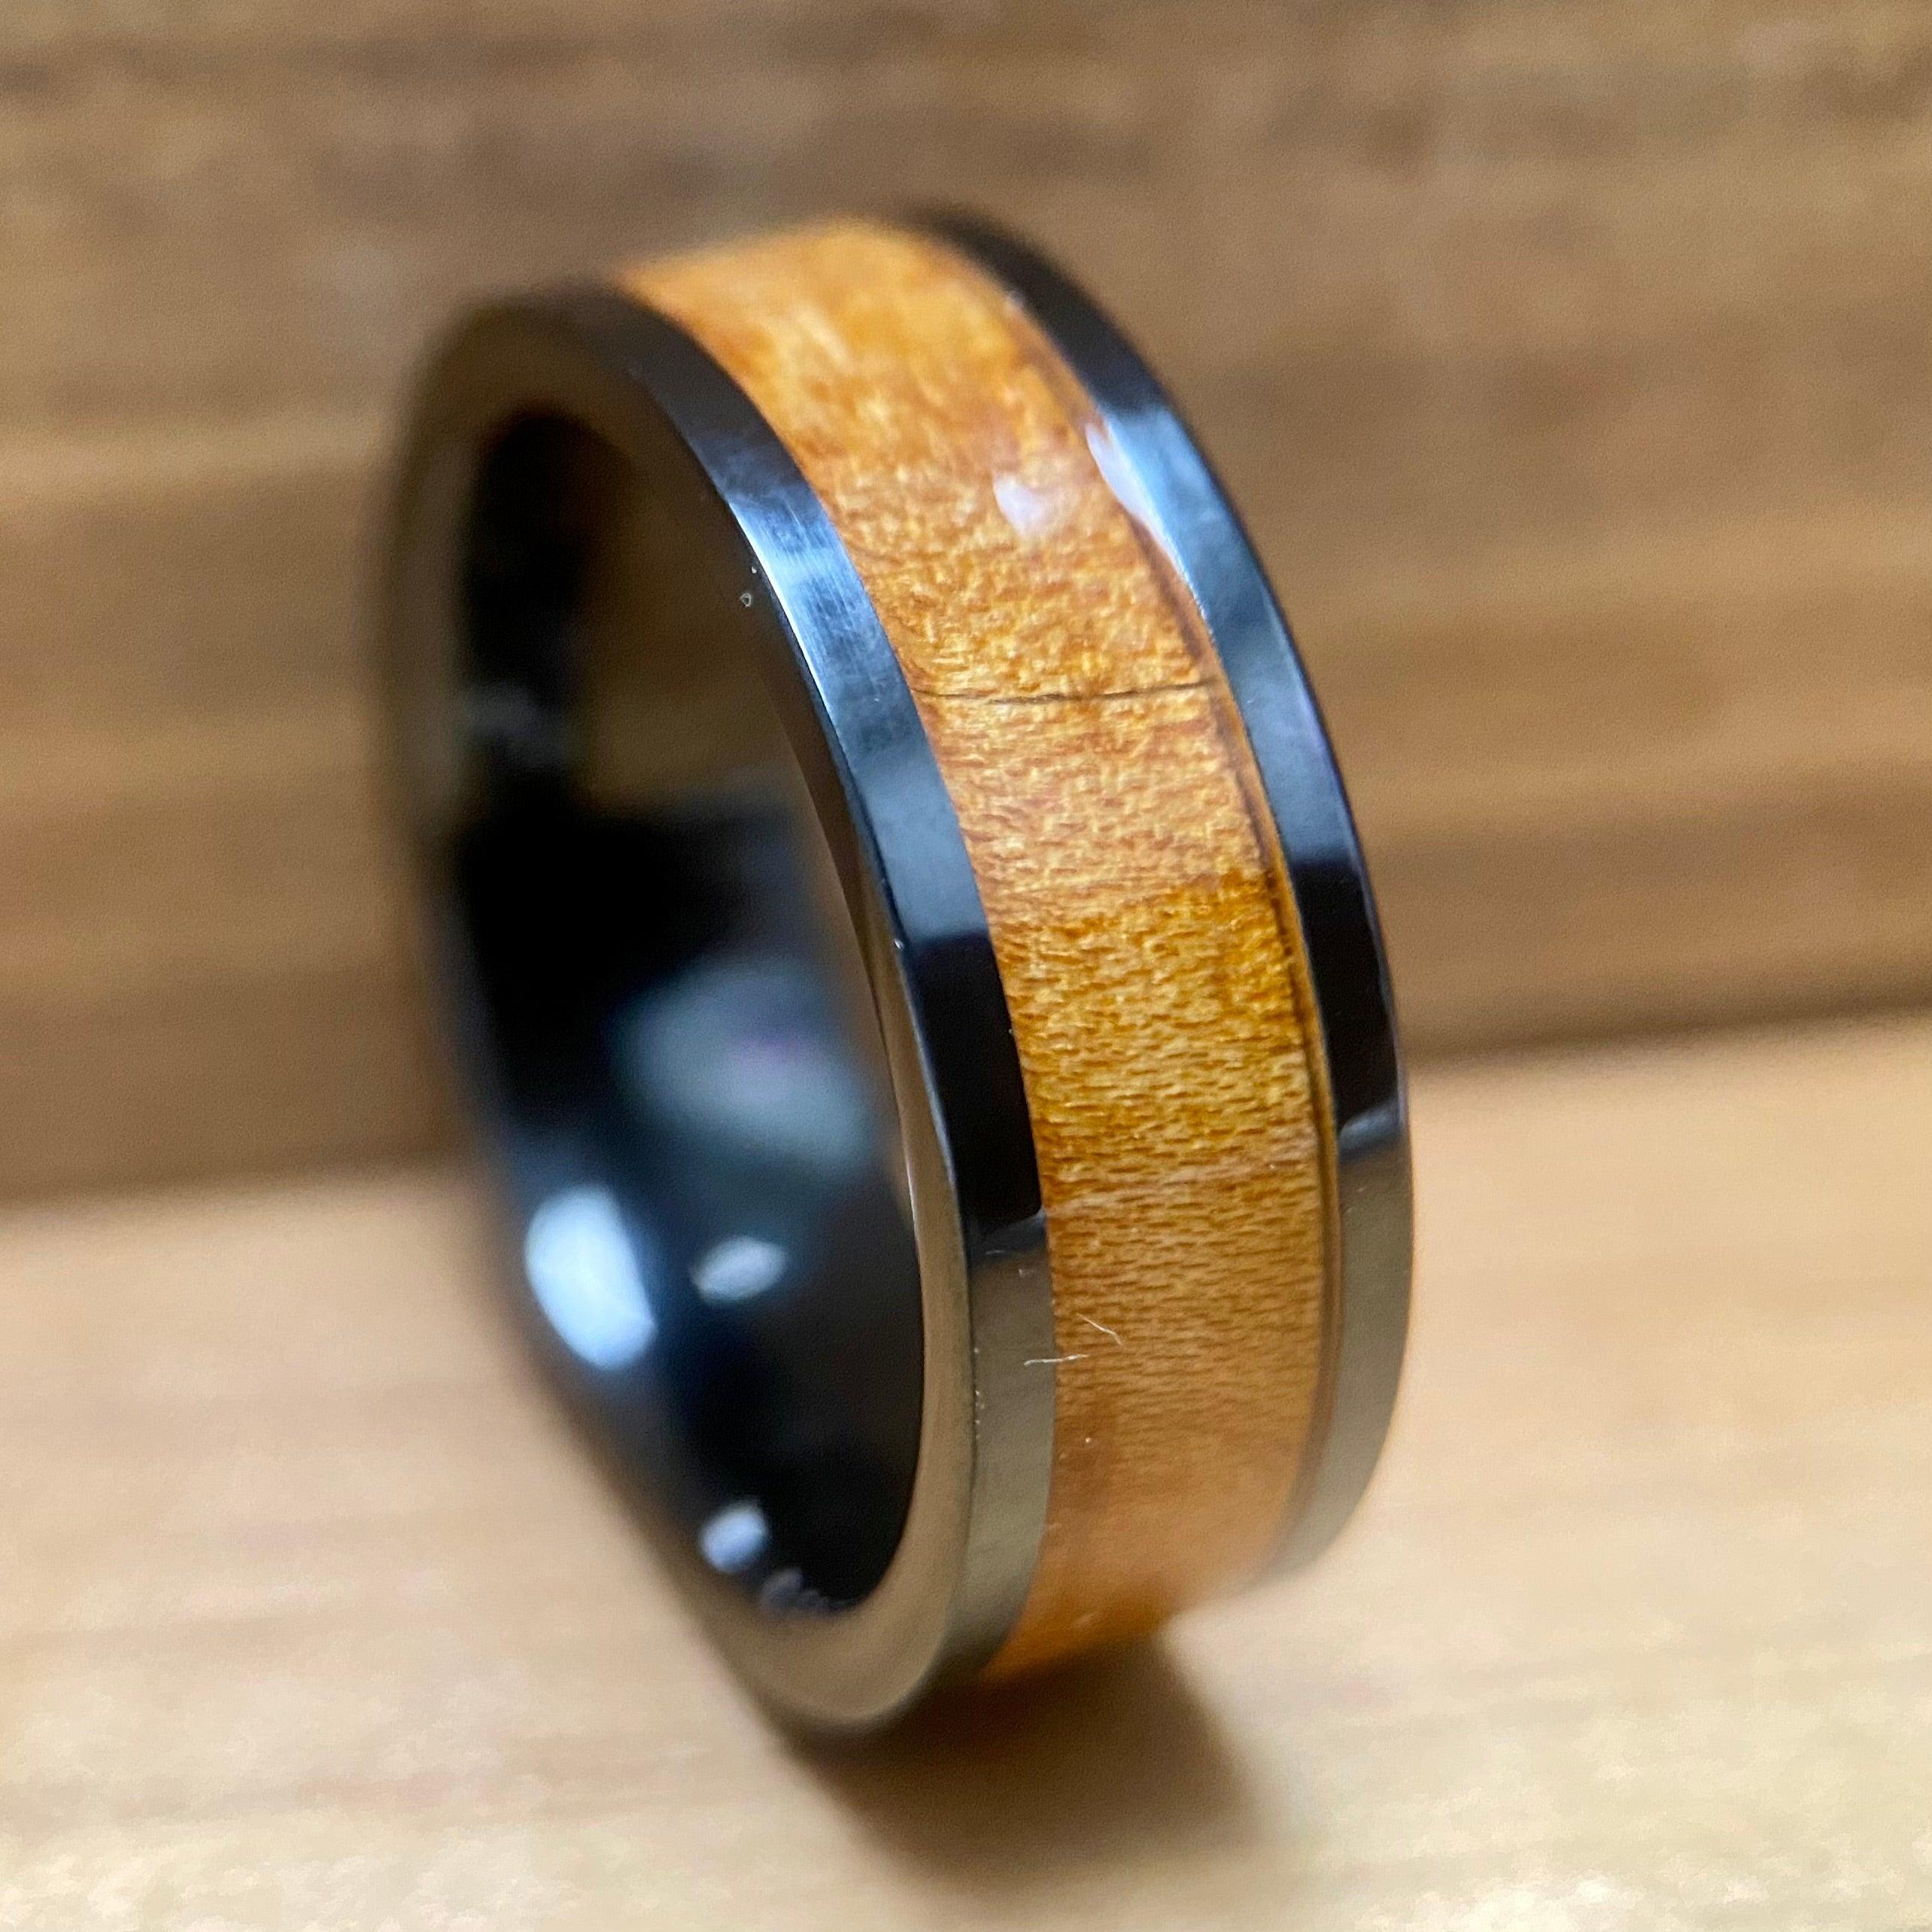 "The Franklin"100% USA Made Black Ceramic Ring With Wood From Ben Franklins Home ALT Wedding Band BW James Jewelers 